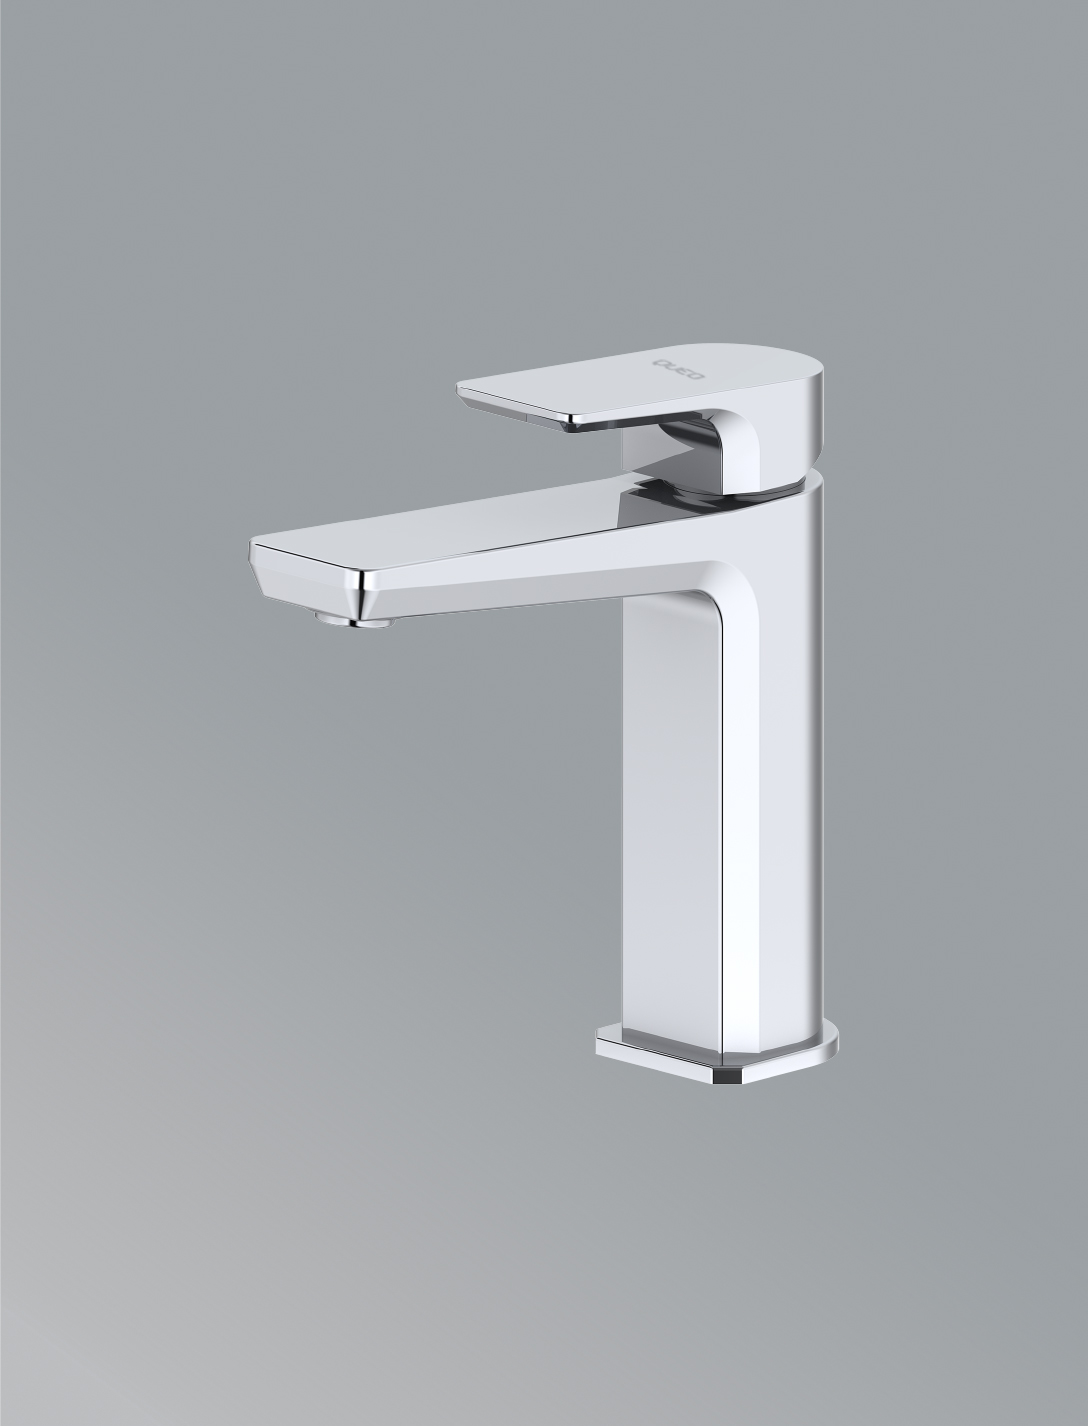  Single Control Basin Faucet In Polished Chrome